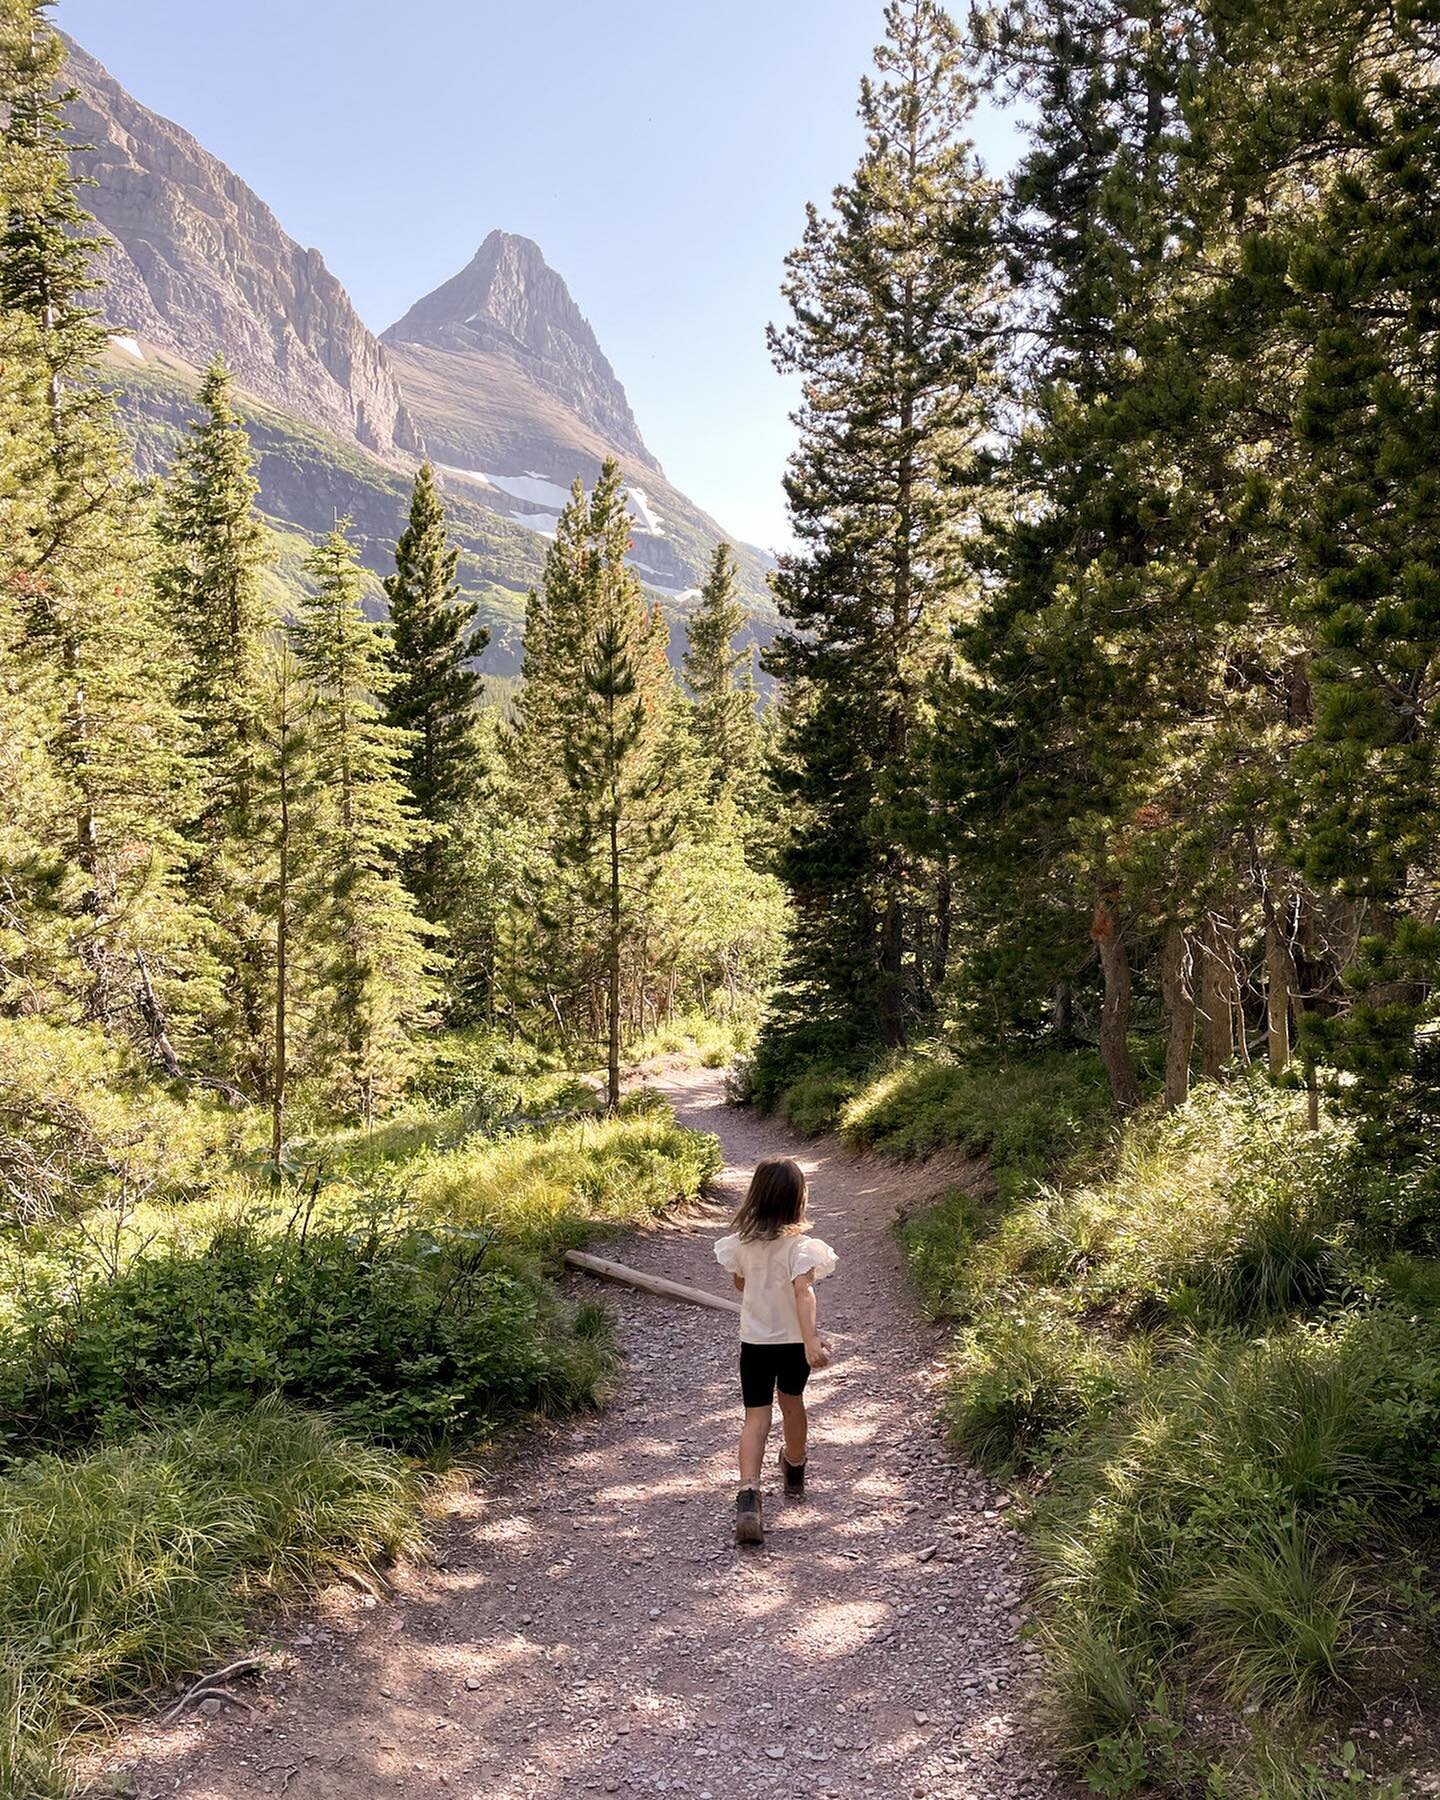 Glacier Guide: best hikes for families 

Our time in Glacier this summer looked a little different with a 3 month old, but I was reminiscing on our adventures the past few summers and how special it has been to experience the park with Sophie. If you